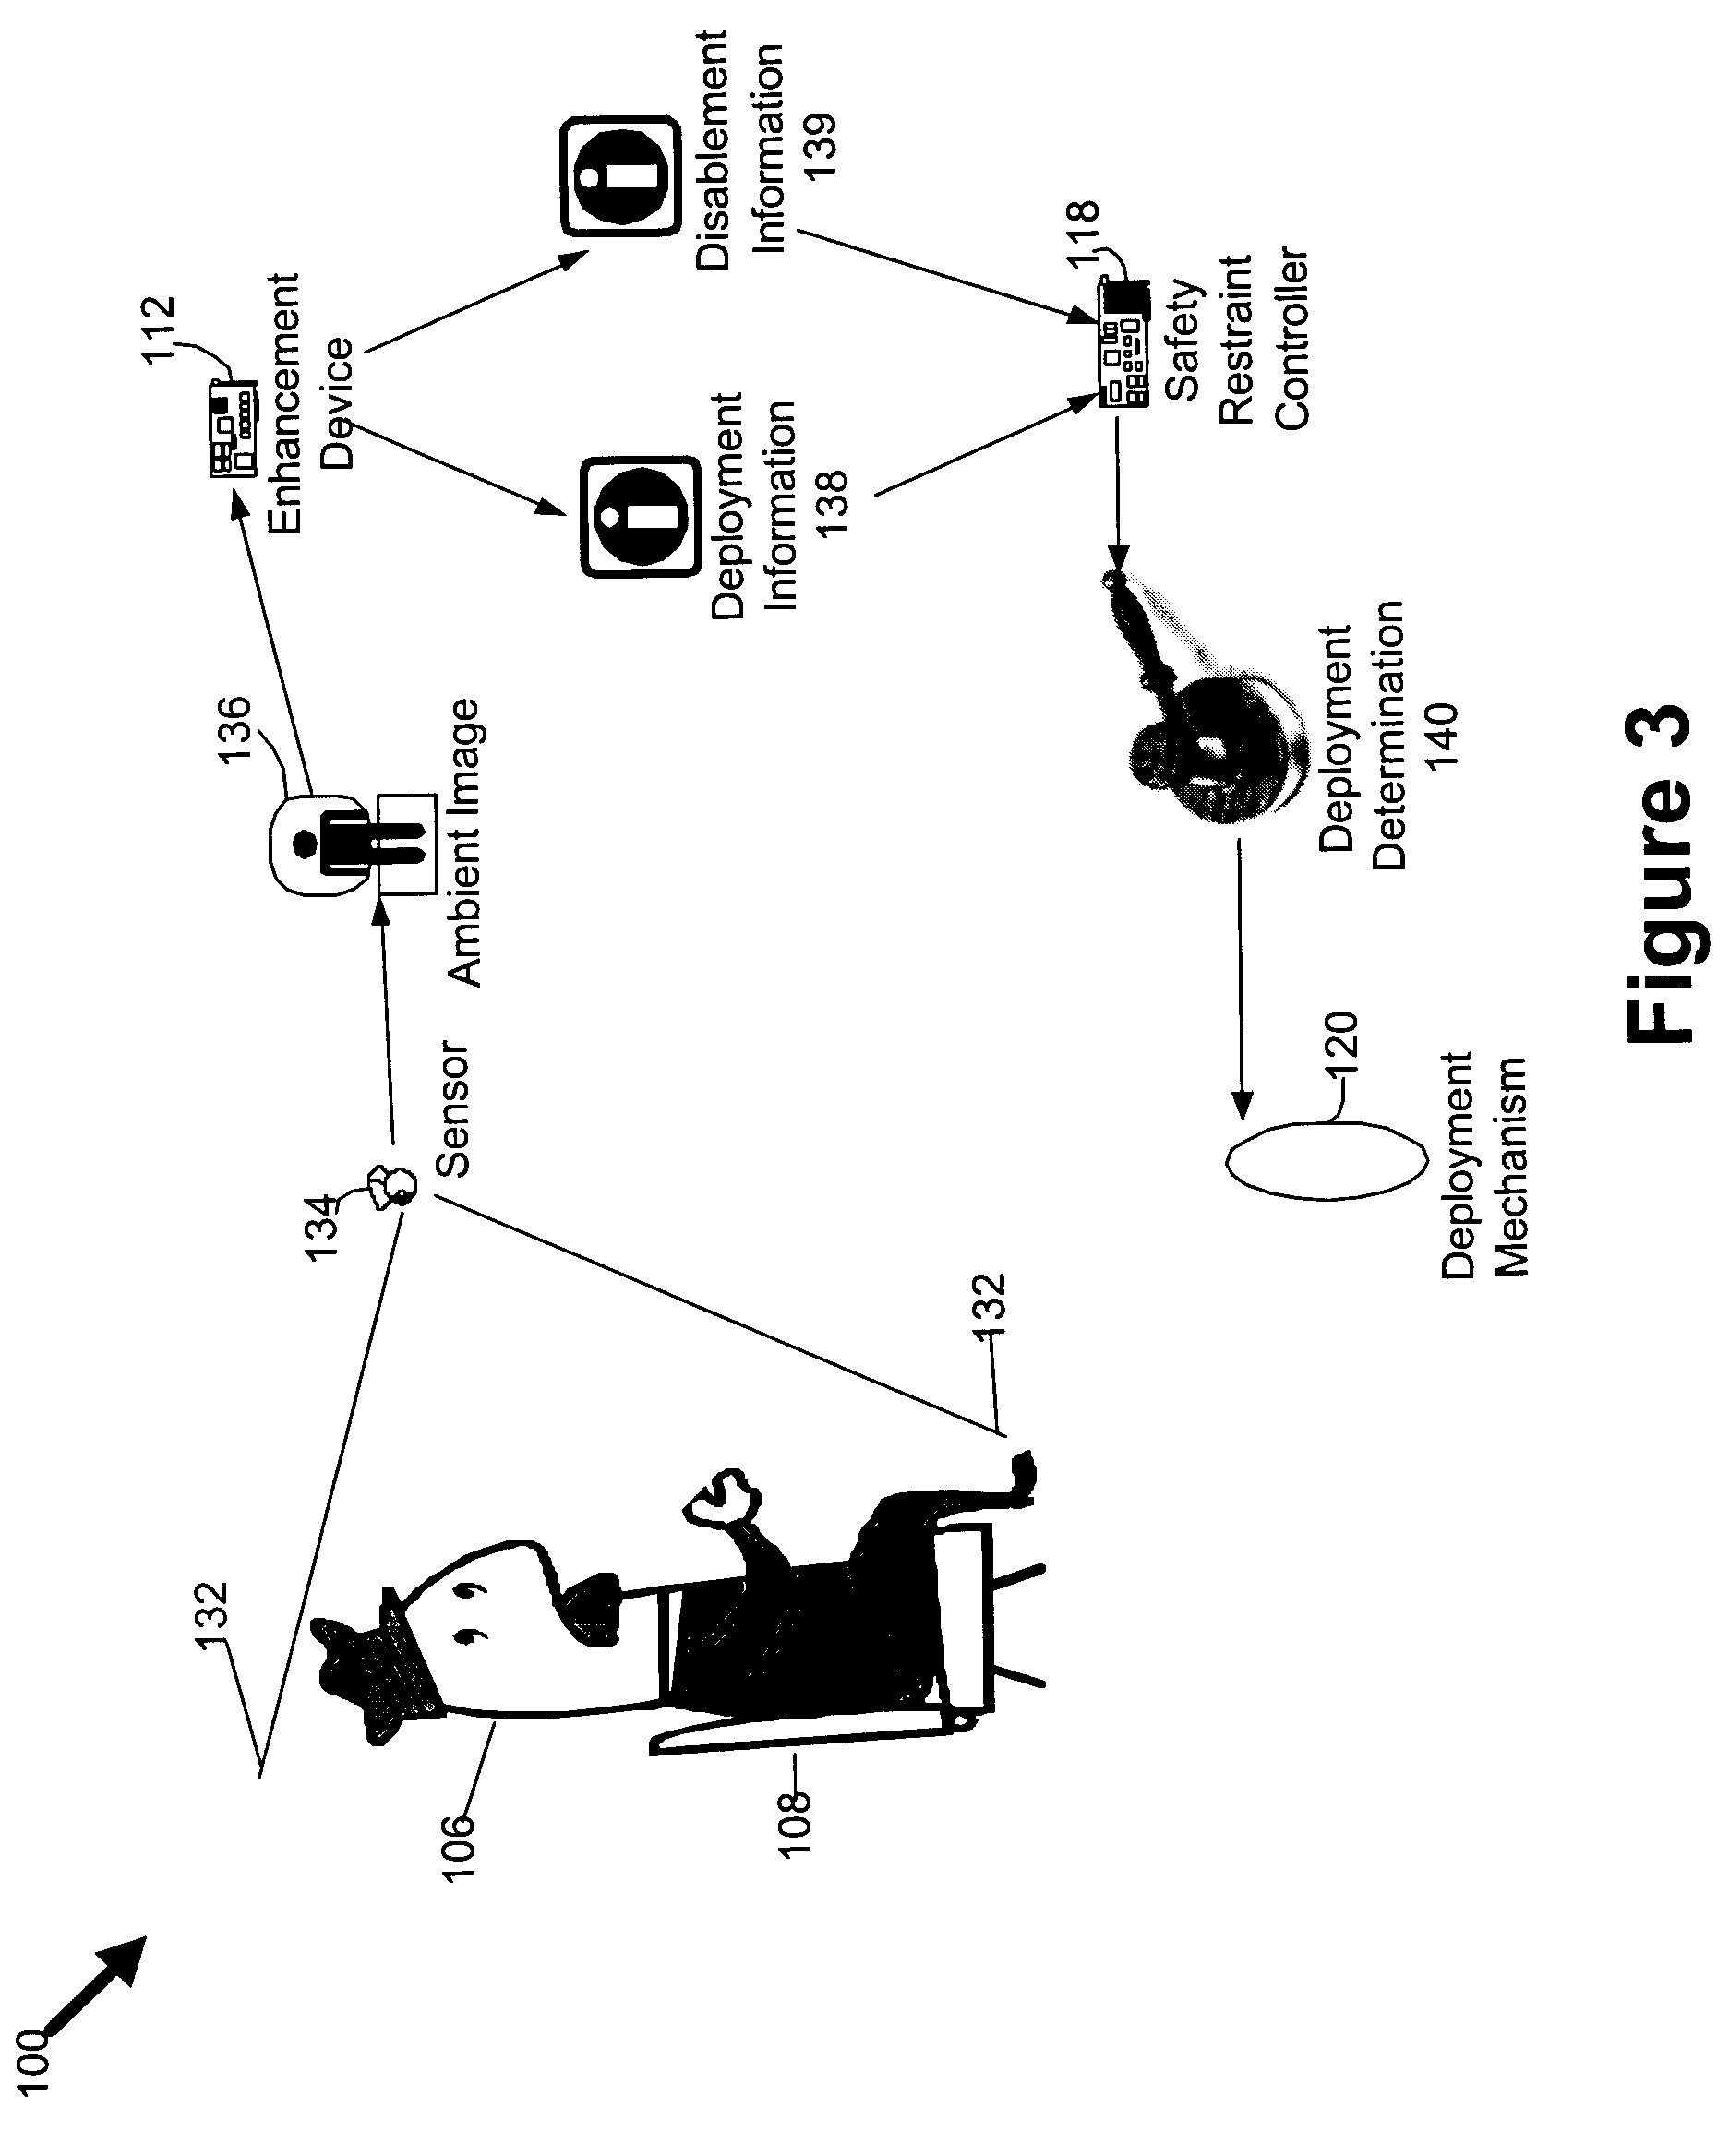 Decision enhancement system for a vehicle safety restraint application